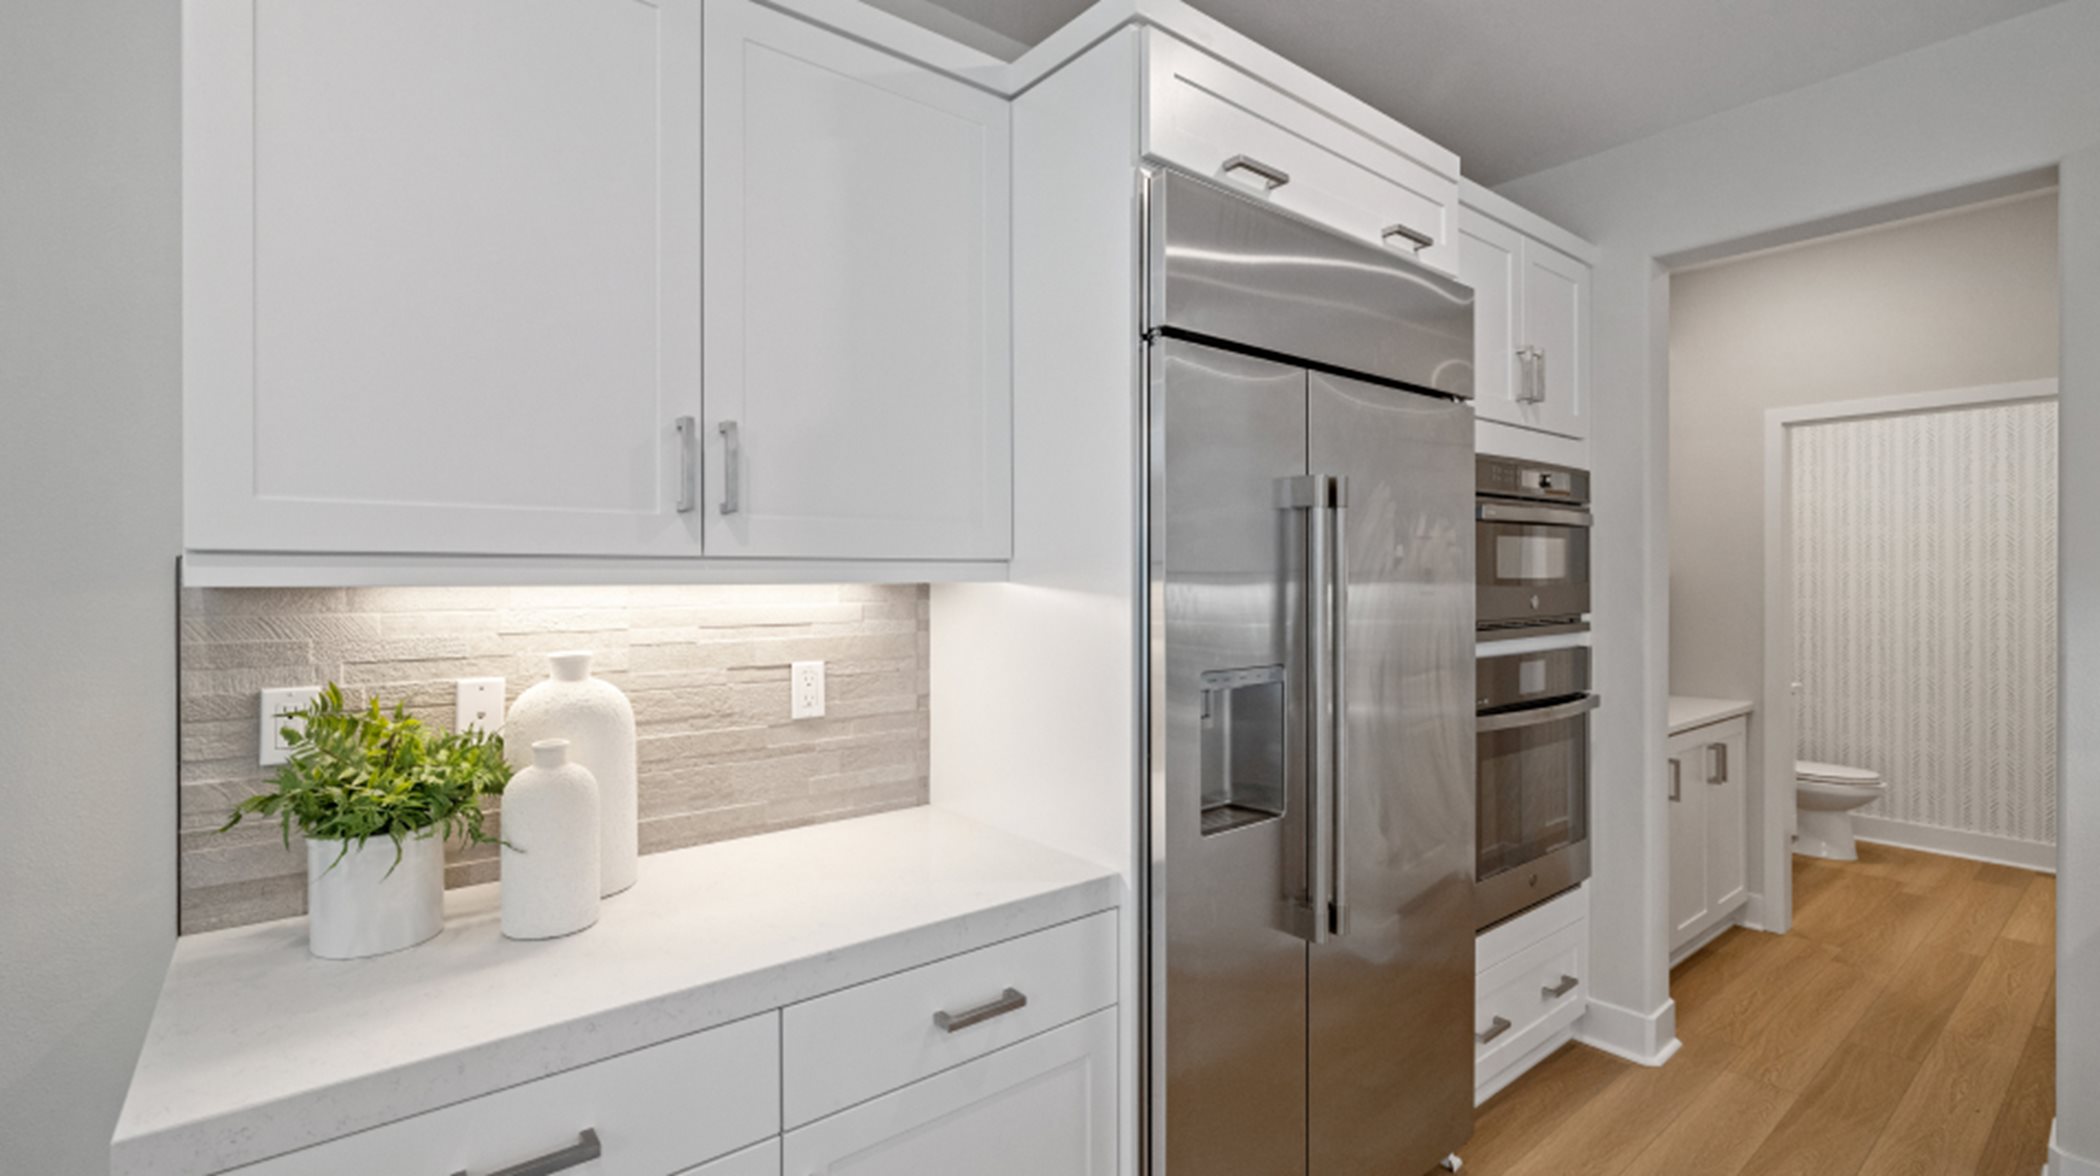 Fridge and kitchen cabinetry